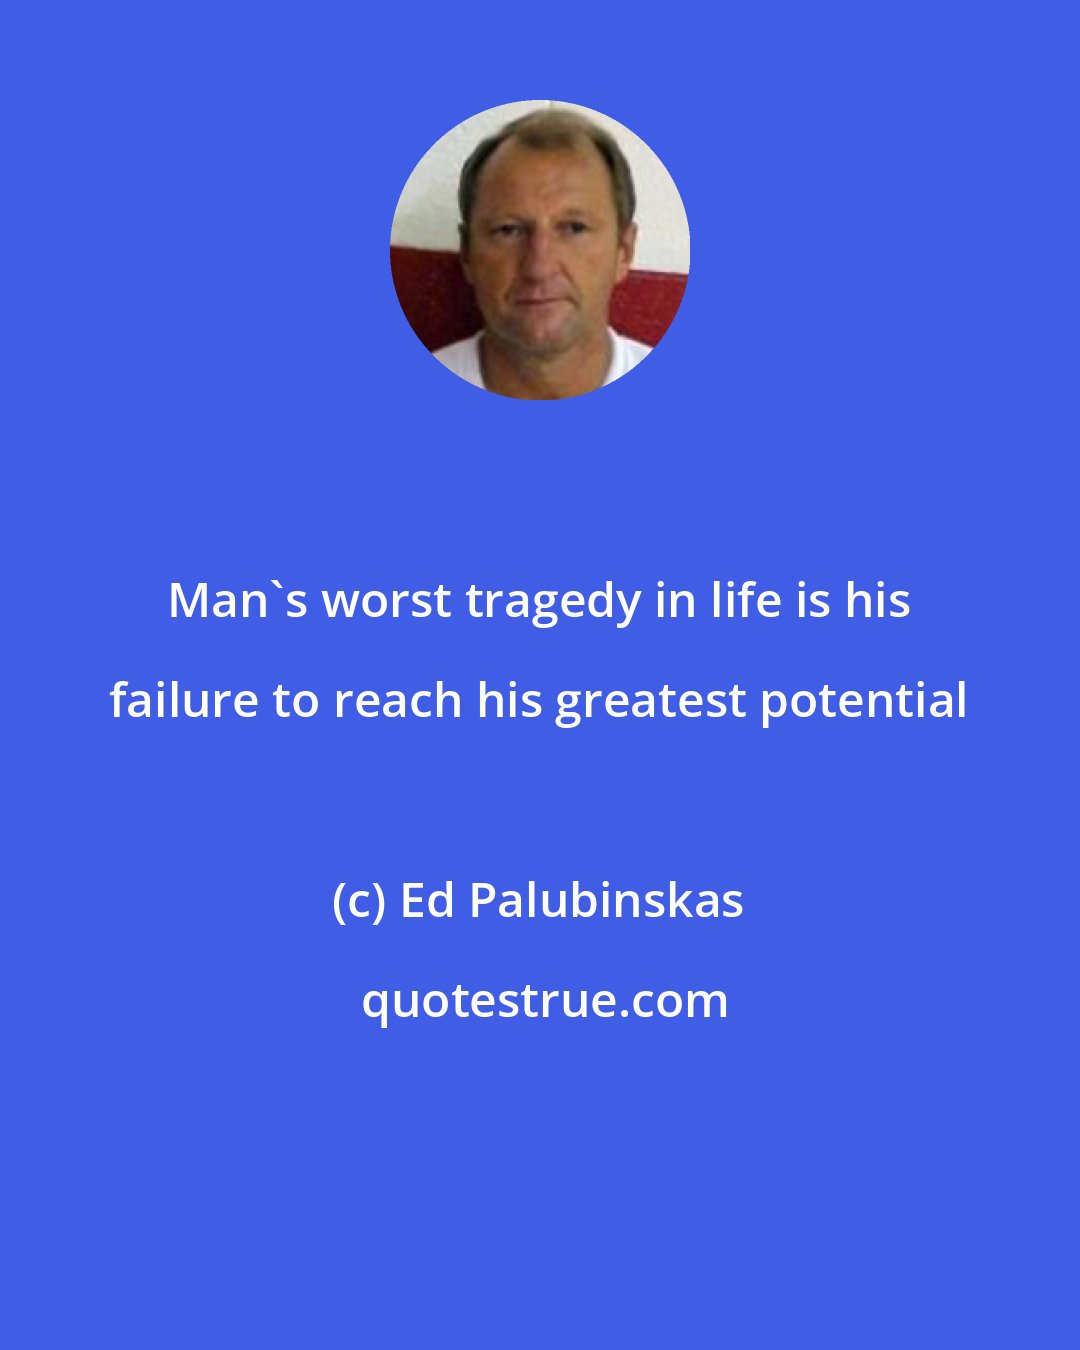 Ed Palubinskas: Man's worst tragedy in life is his failure to reach his greatest potential